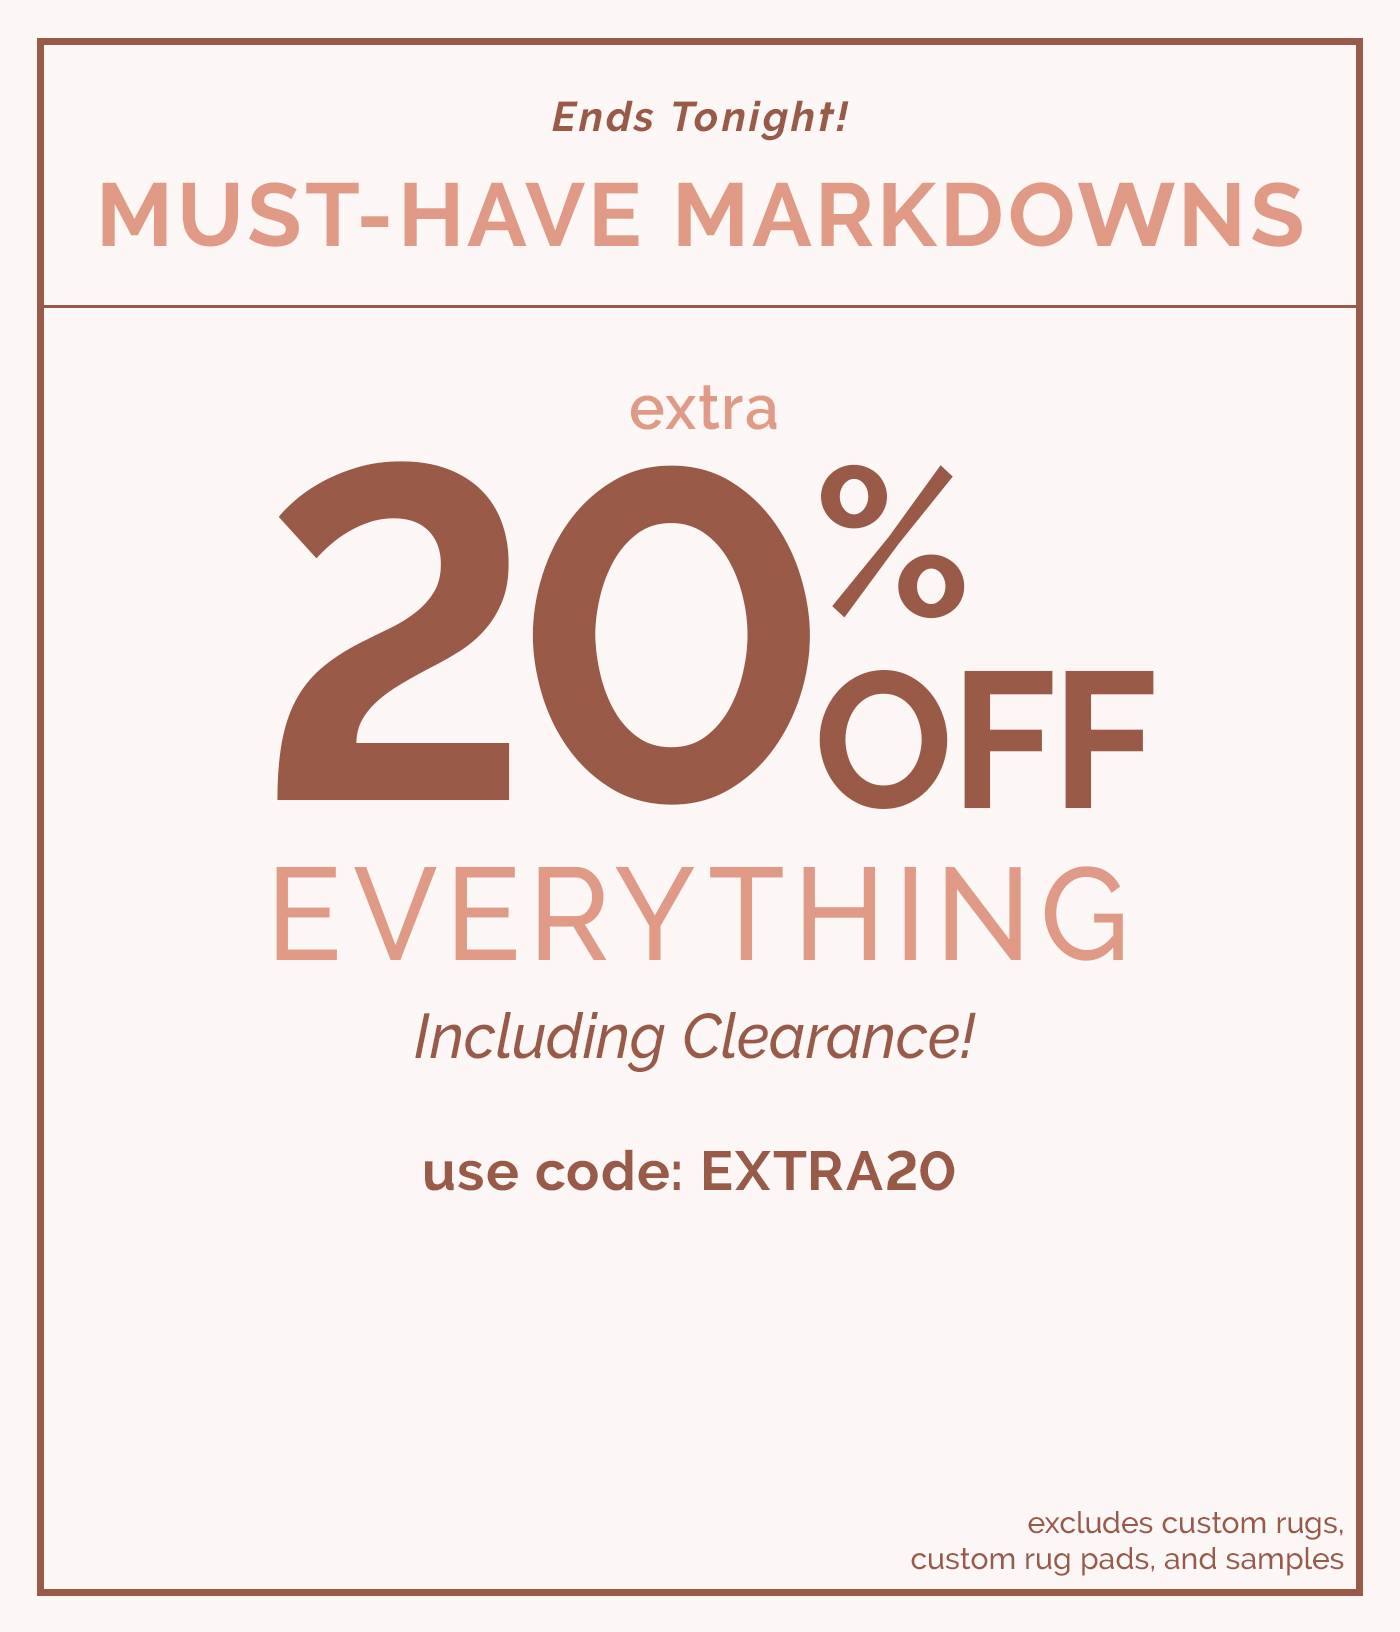 Must-Have Markdowns Ends Tonight (primary)